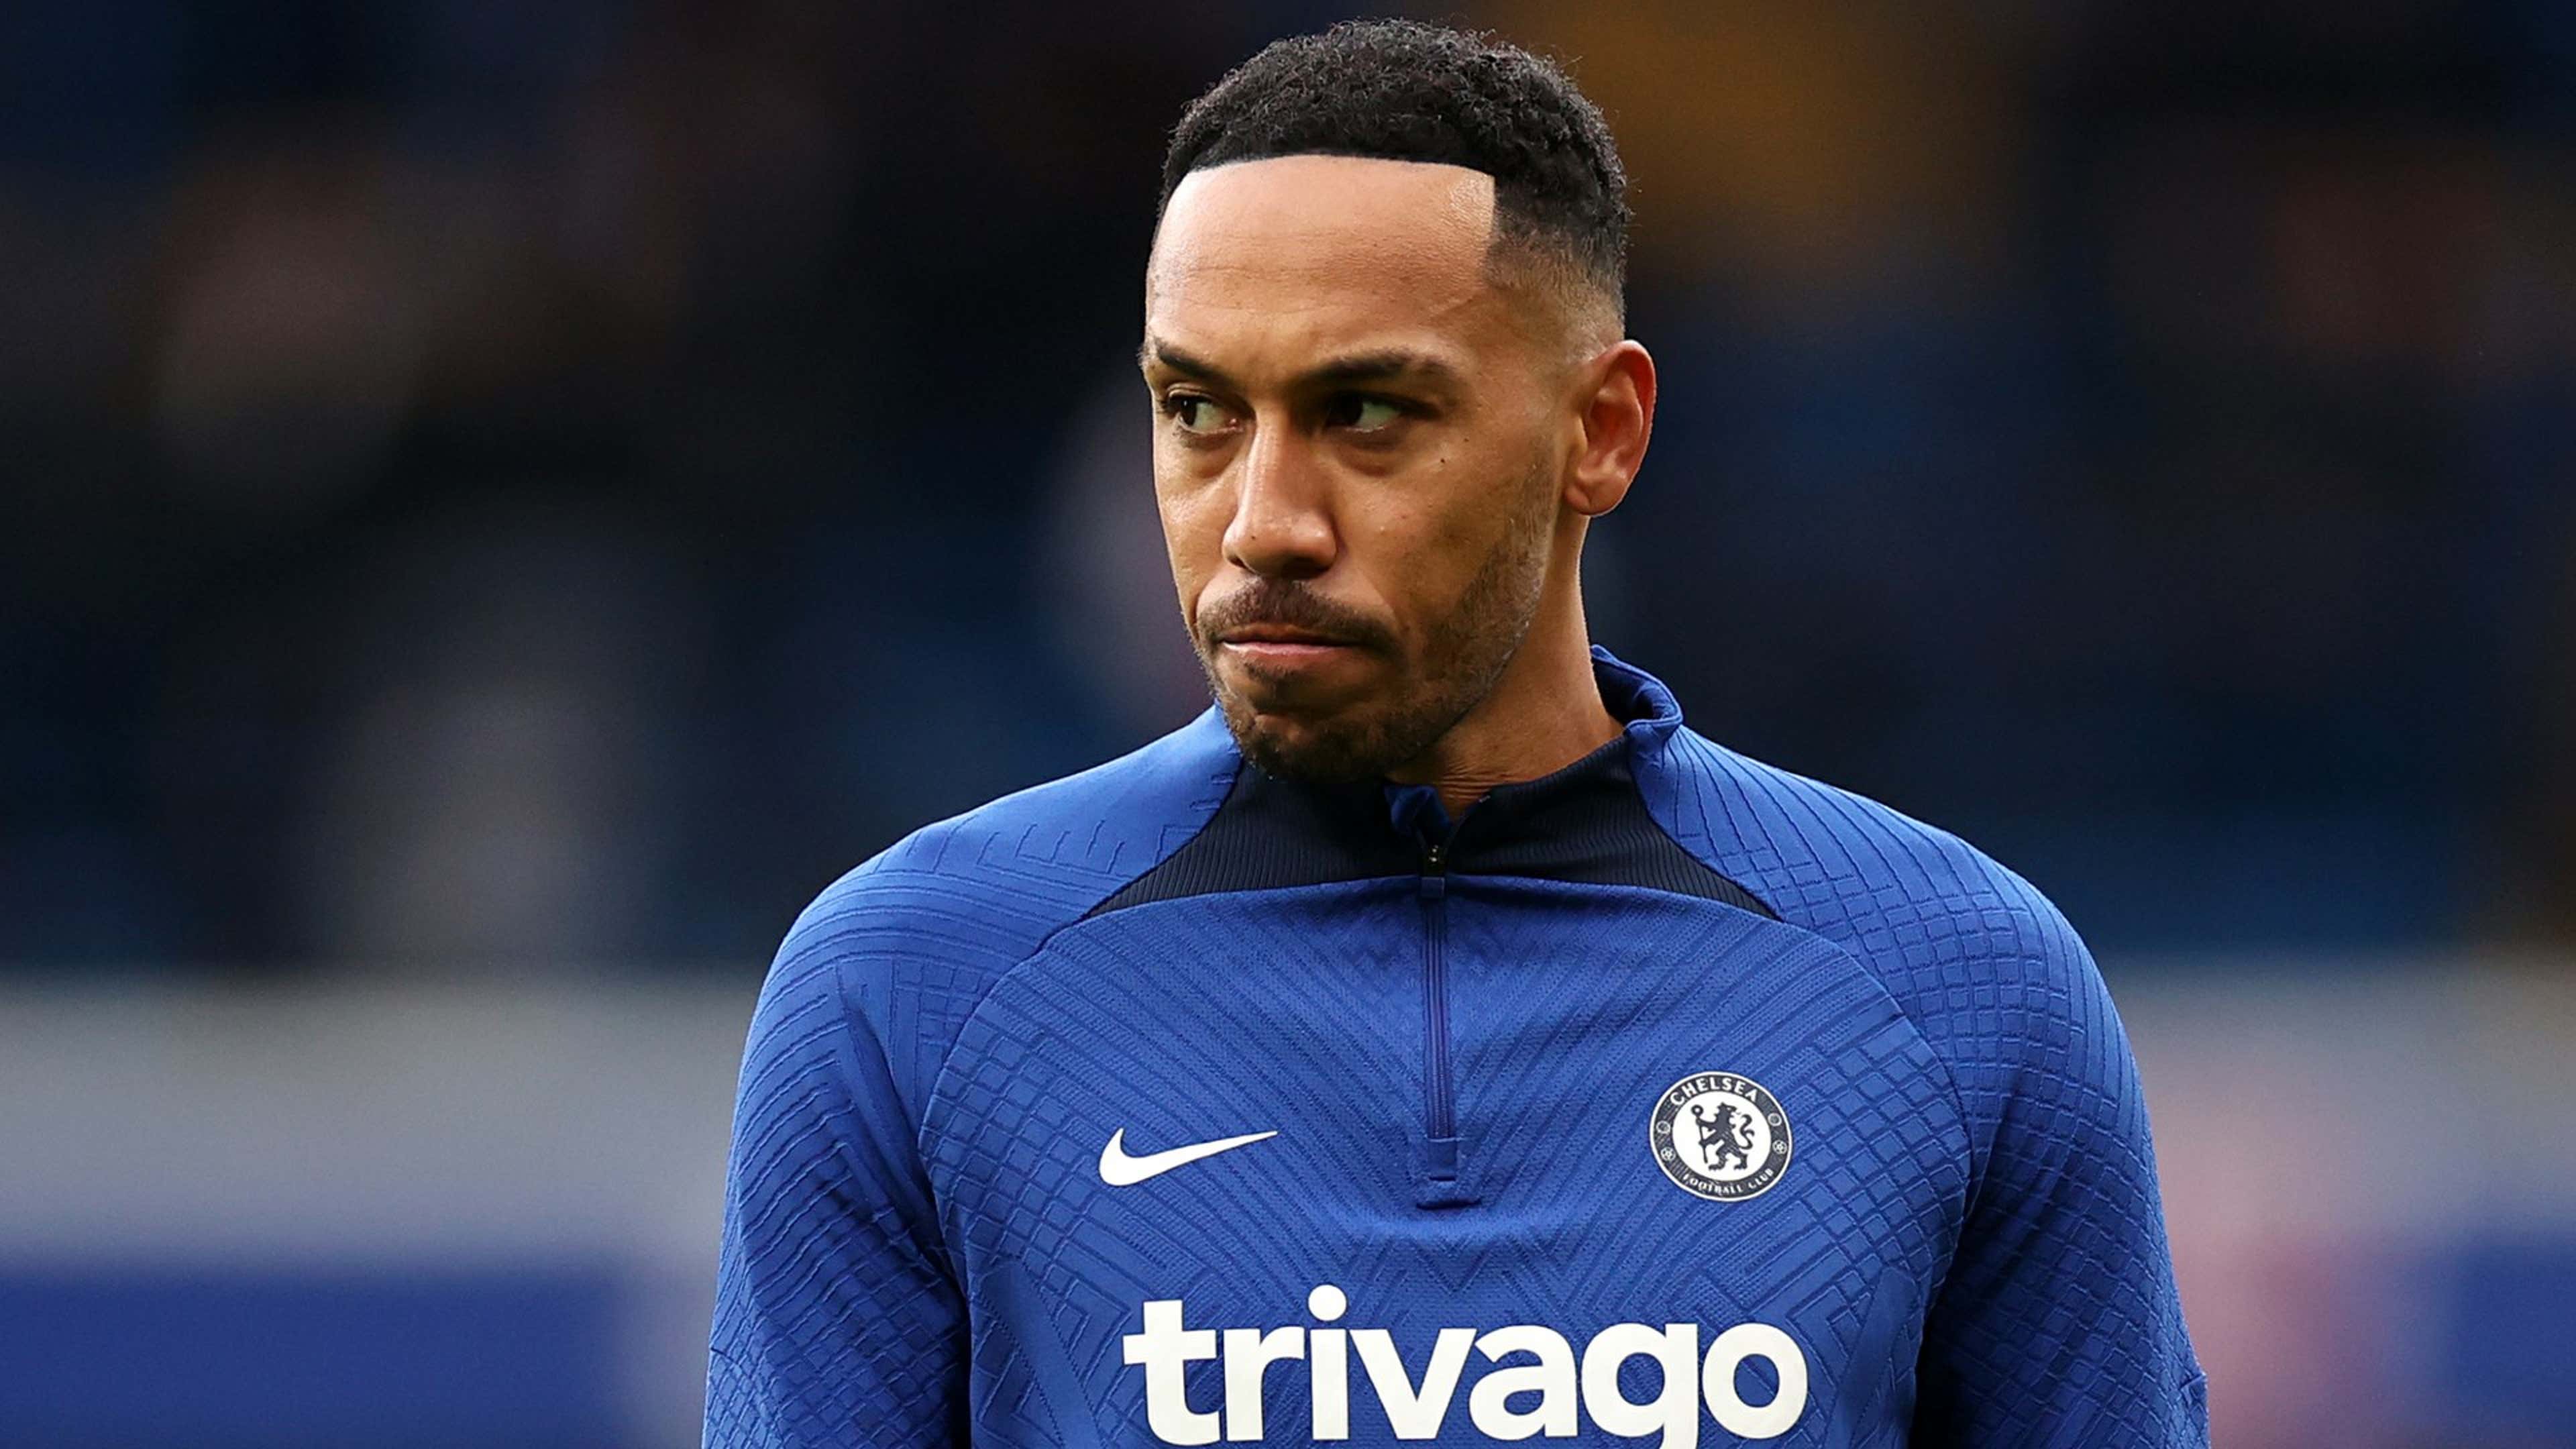 Pierre-Emerick Aubameyang is back! Chelsea forward's exile ends as he's  named on bench for Tottenham clash